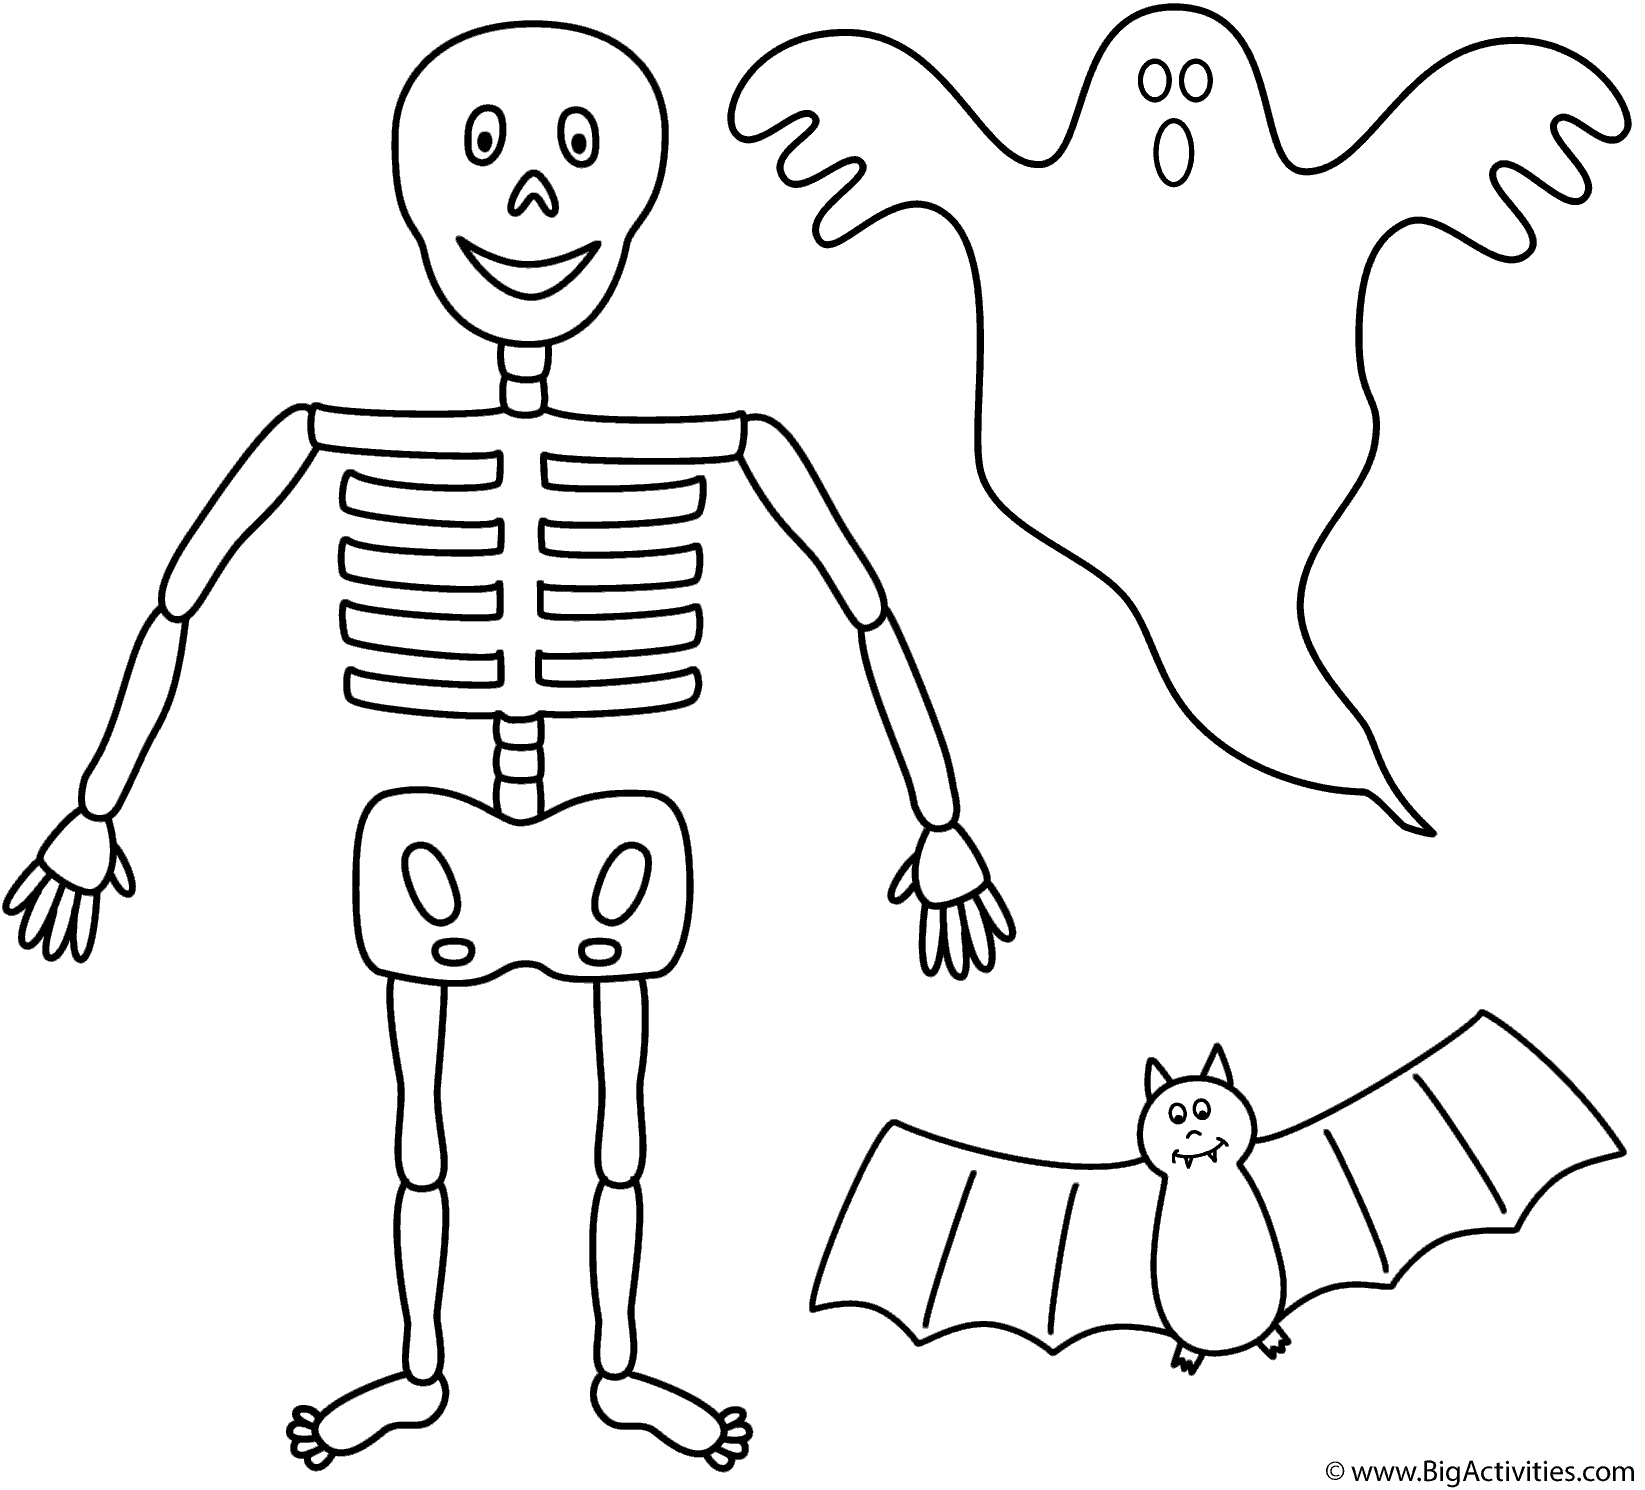 Download Skeleton with bat and ghost - Coloring Page (Halloween)